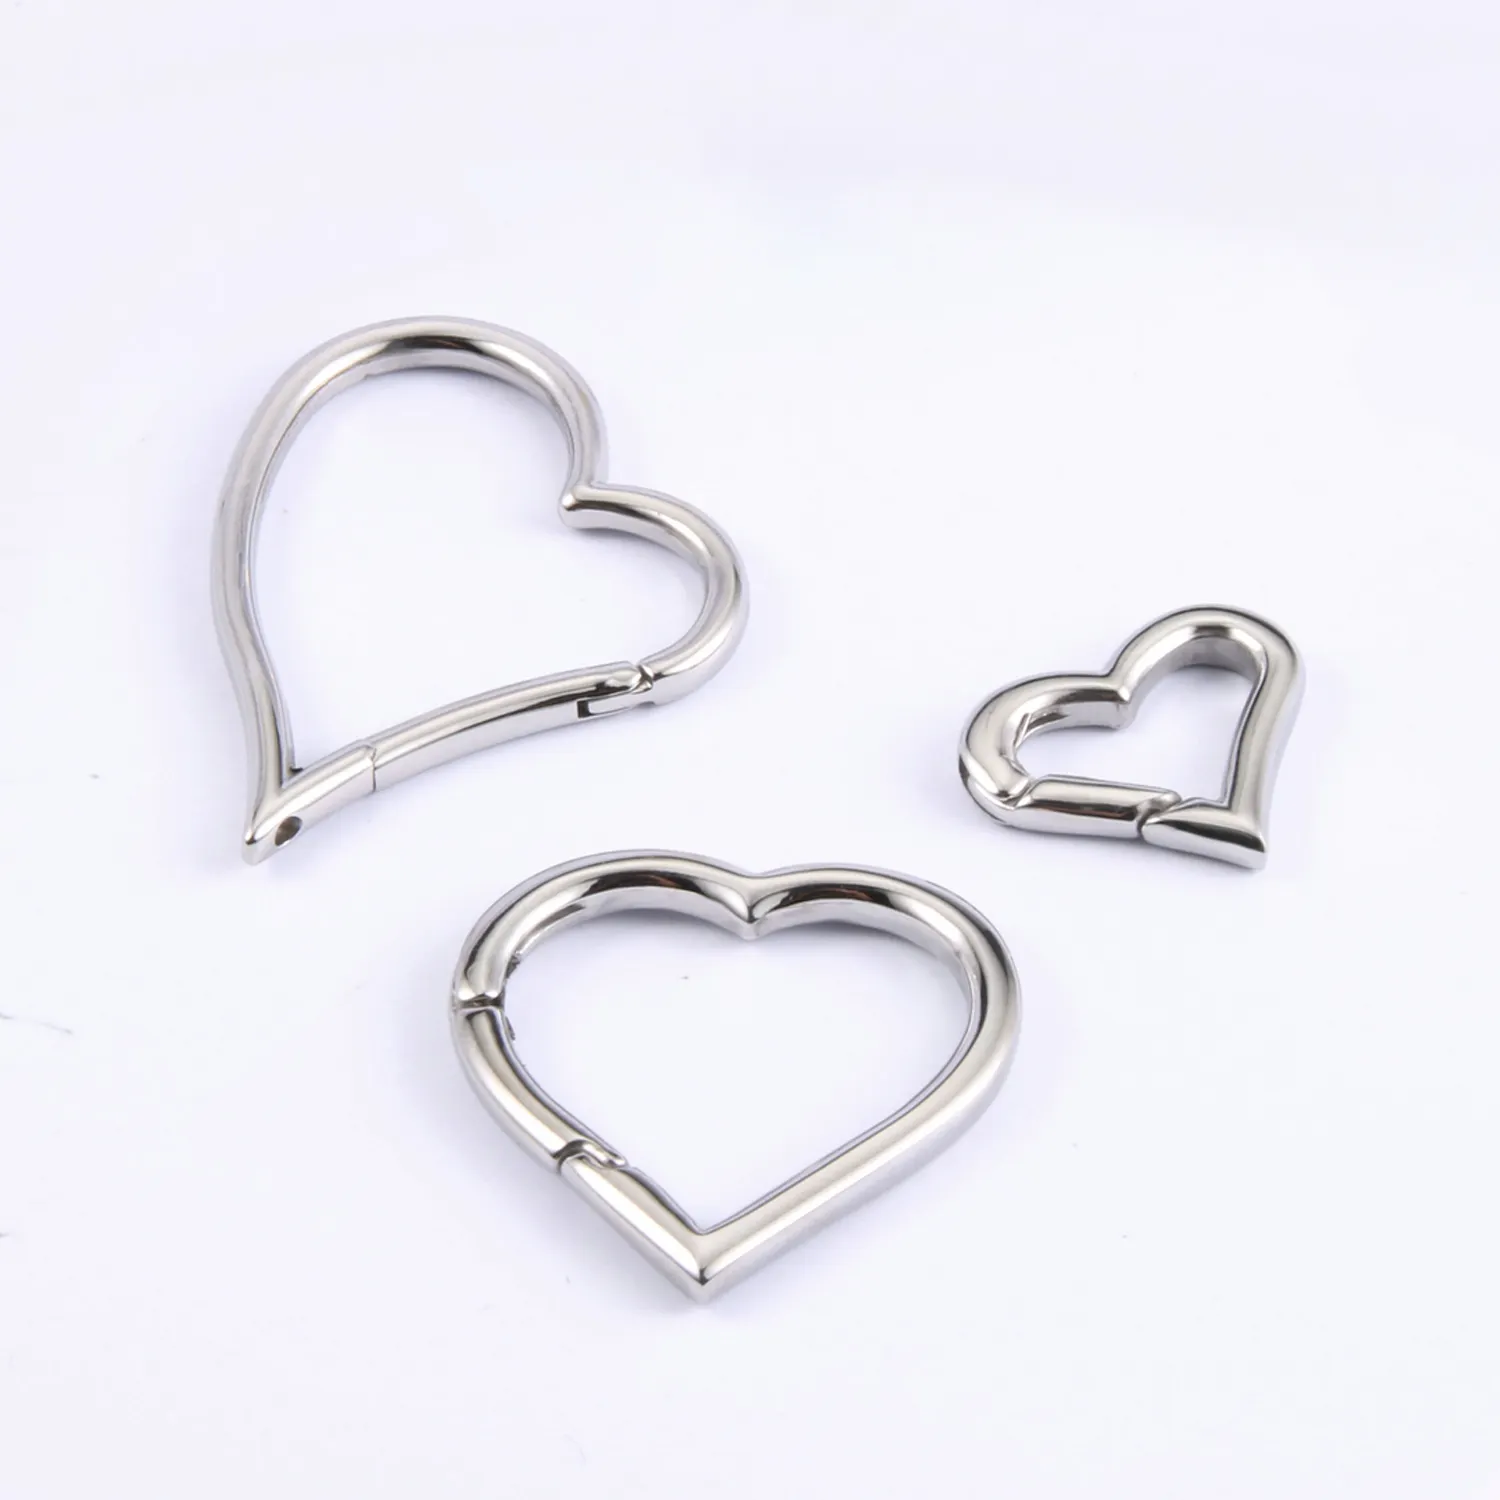 Stainless Steel Heart Shape Spring Clasps Openable Carabiner Keychain Bag Clips Hook Dog Chain Buckles Connector Accessories